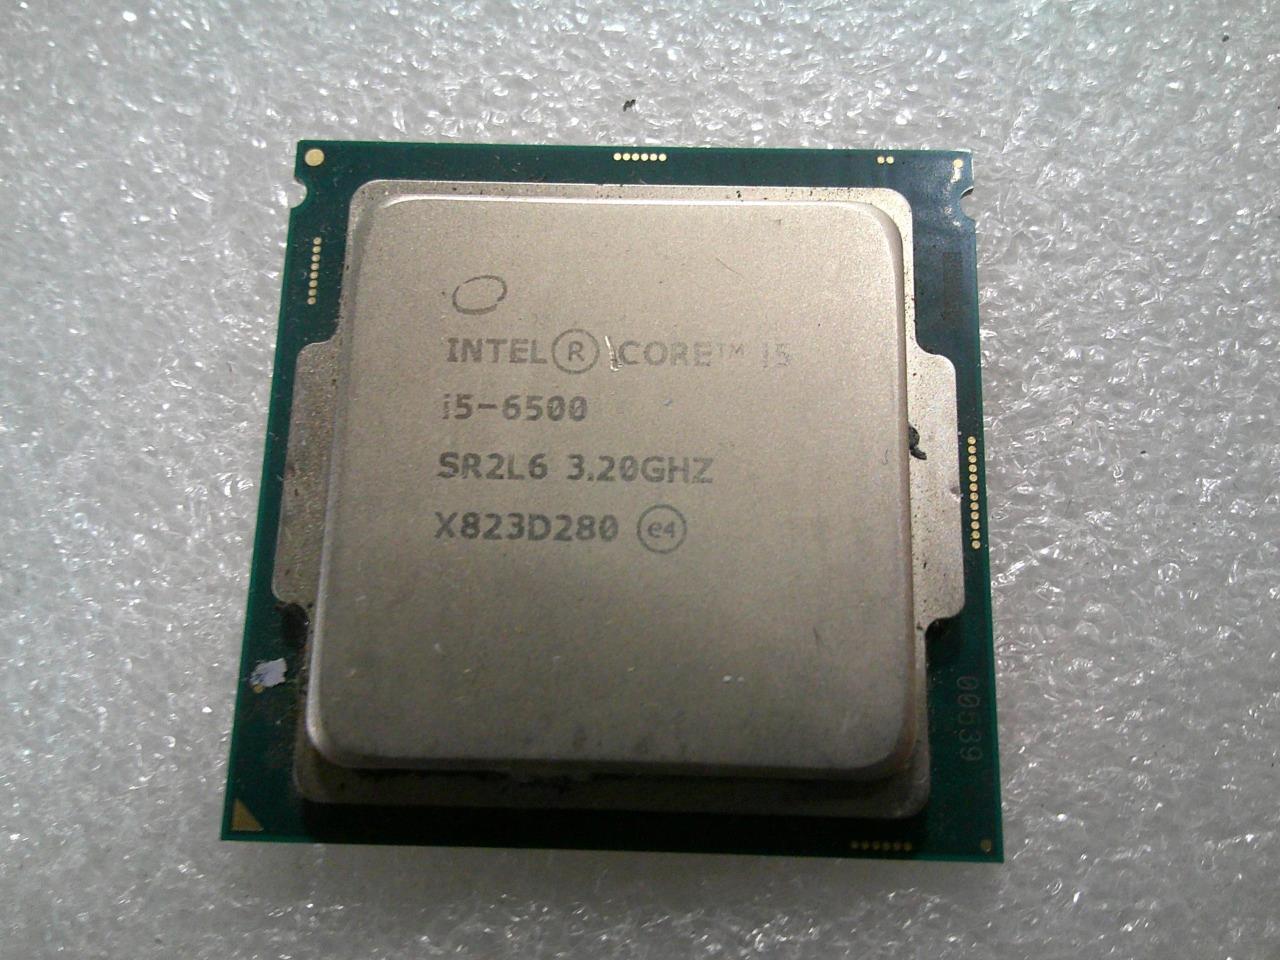 Intel SR2L6 Core i5-6500 3.20GHz 4-Core 6MB LGA1151 CPU Processor. Available Now for $27.95